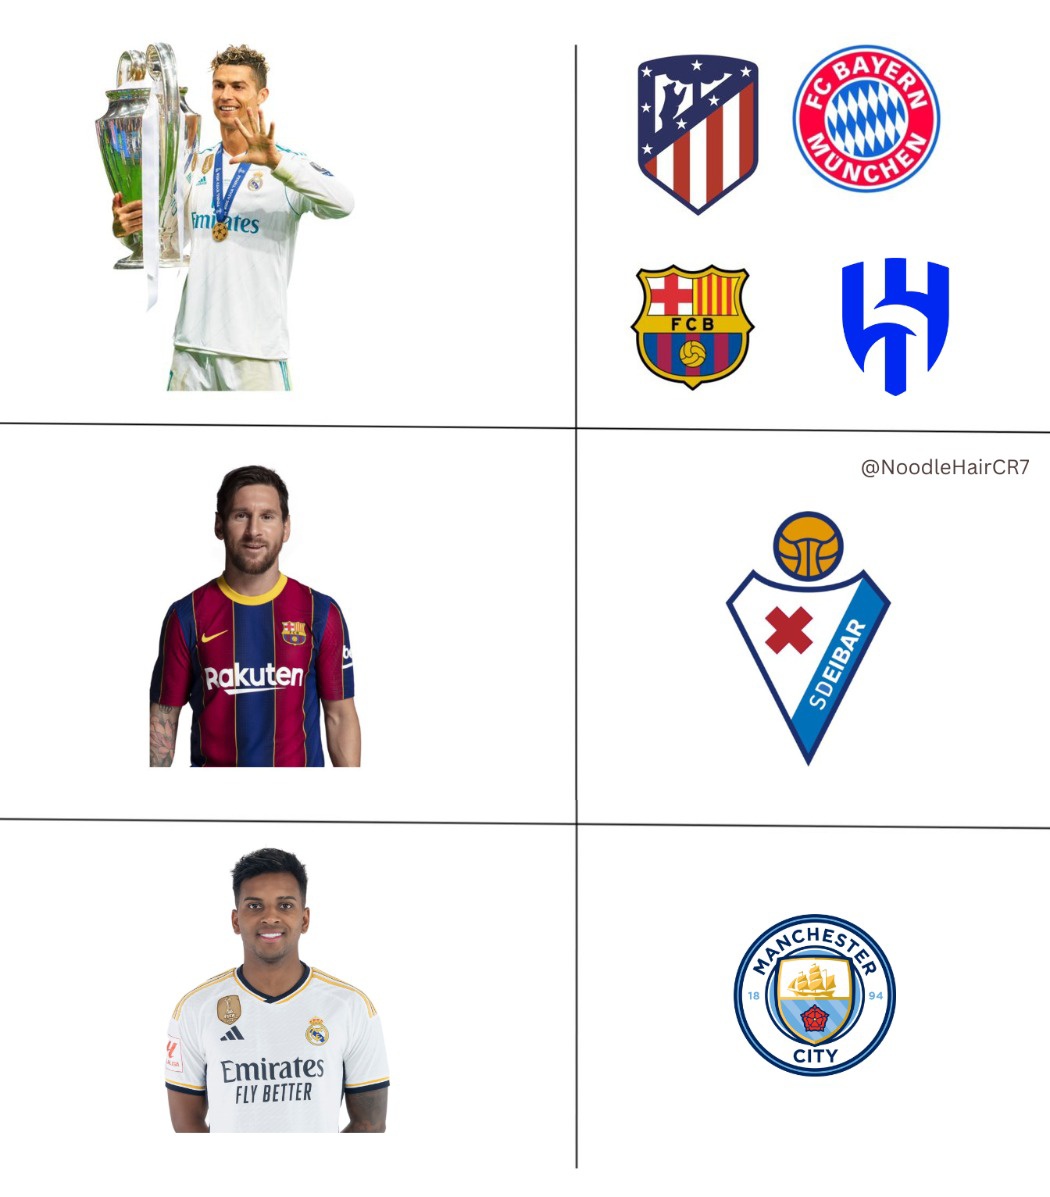 Clubs and their owners: